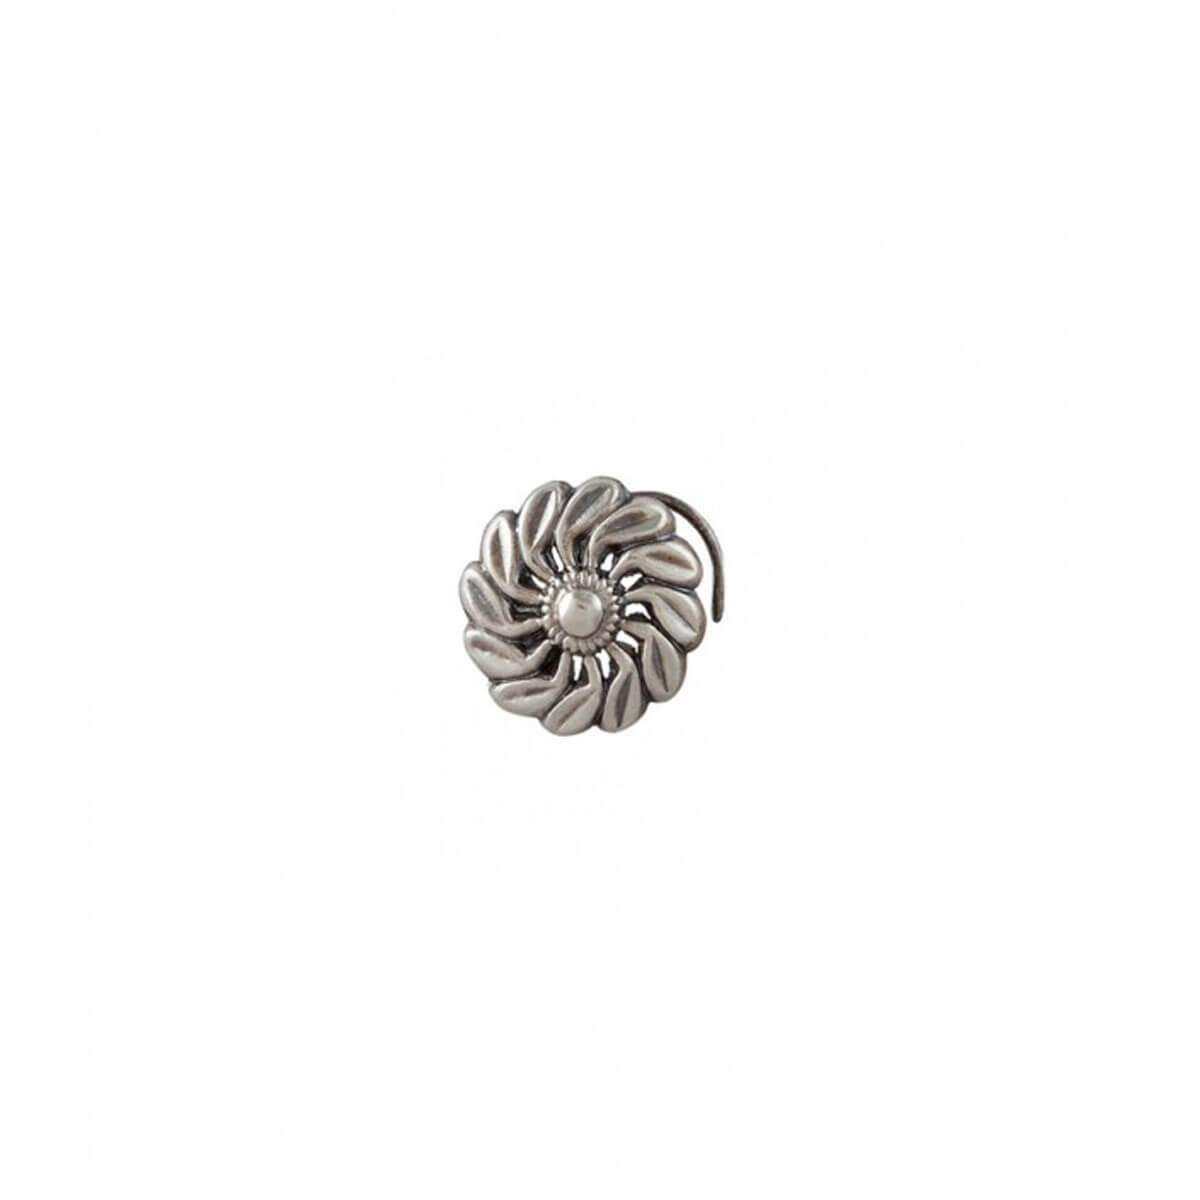 Floral Beauty Silver Nose Pin, Piercing